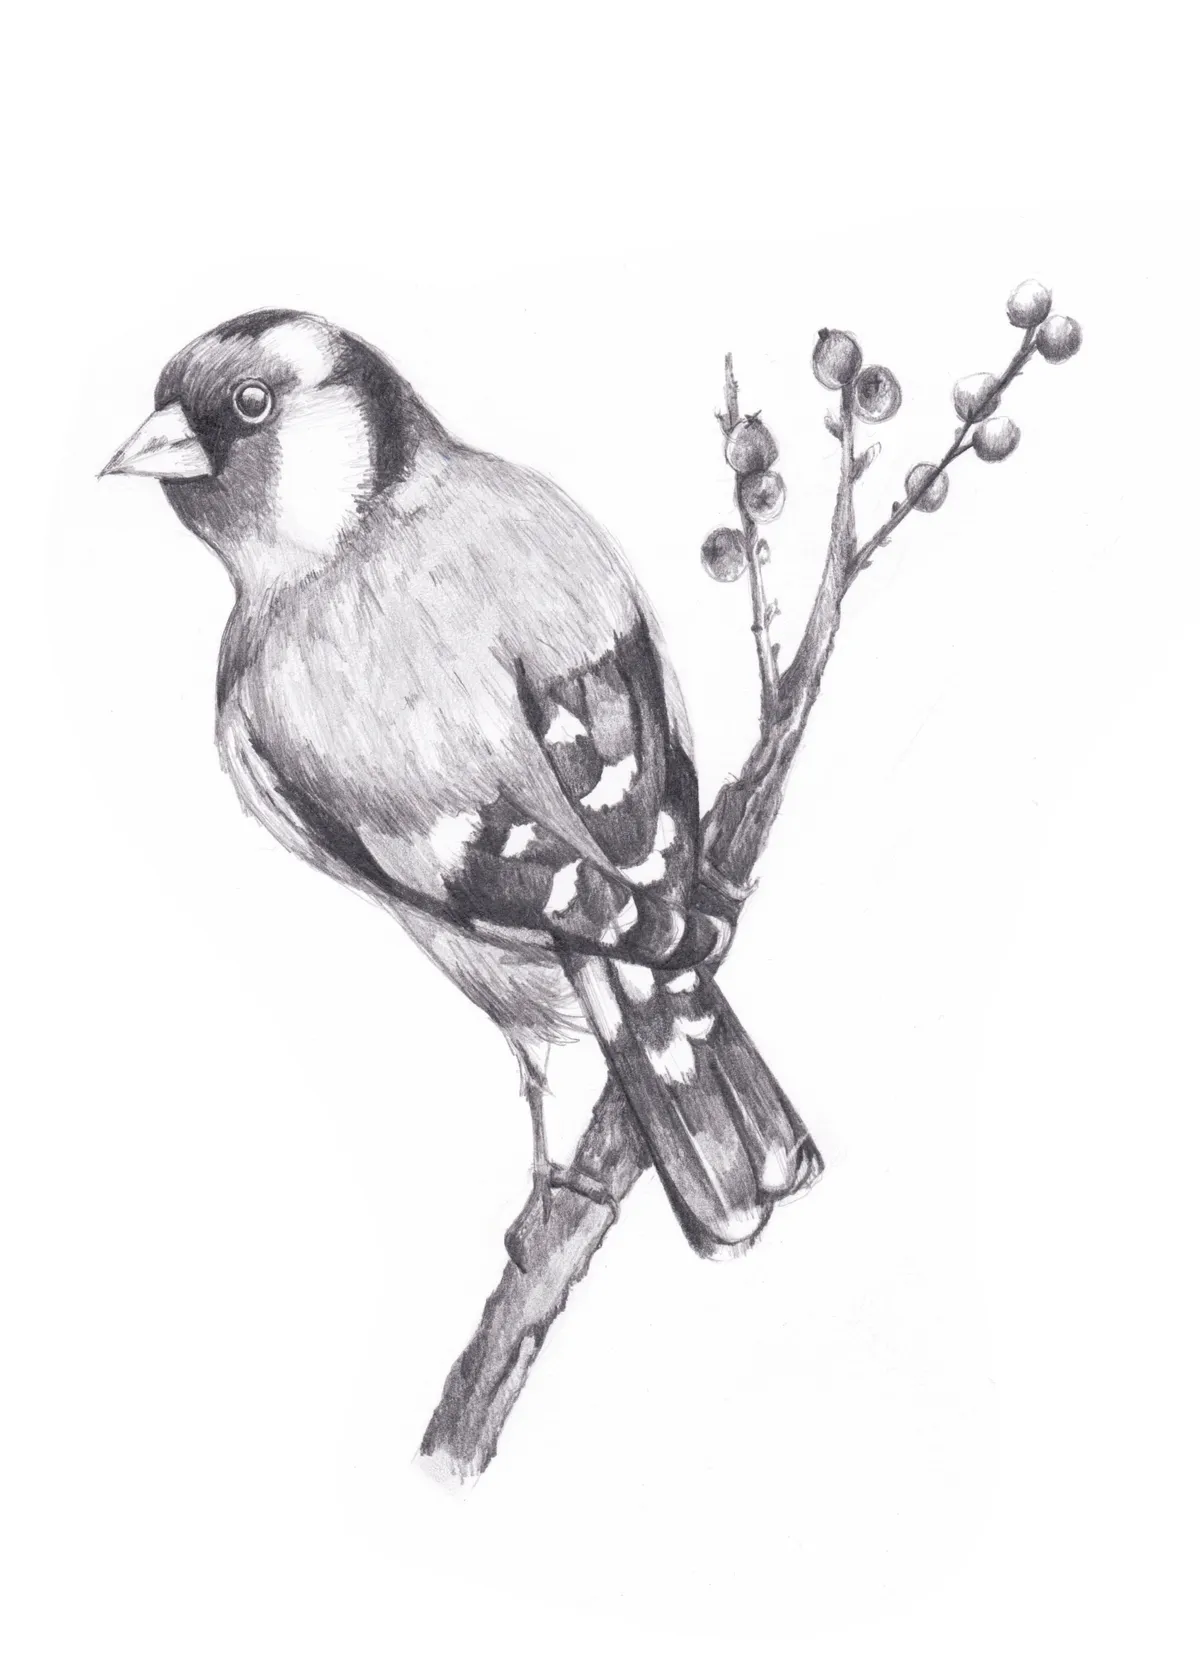 Pencil drawing techniques: learn how to draw a bird